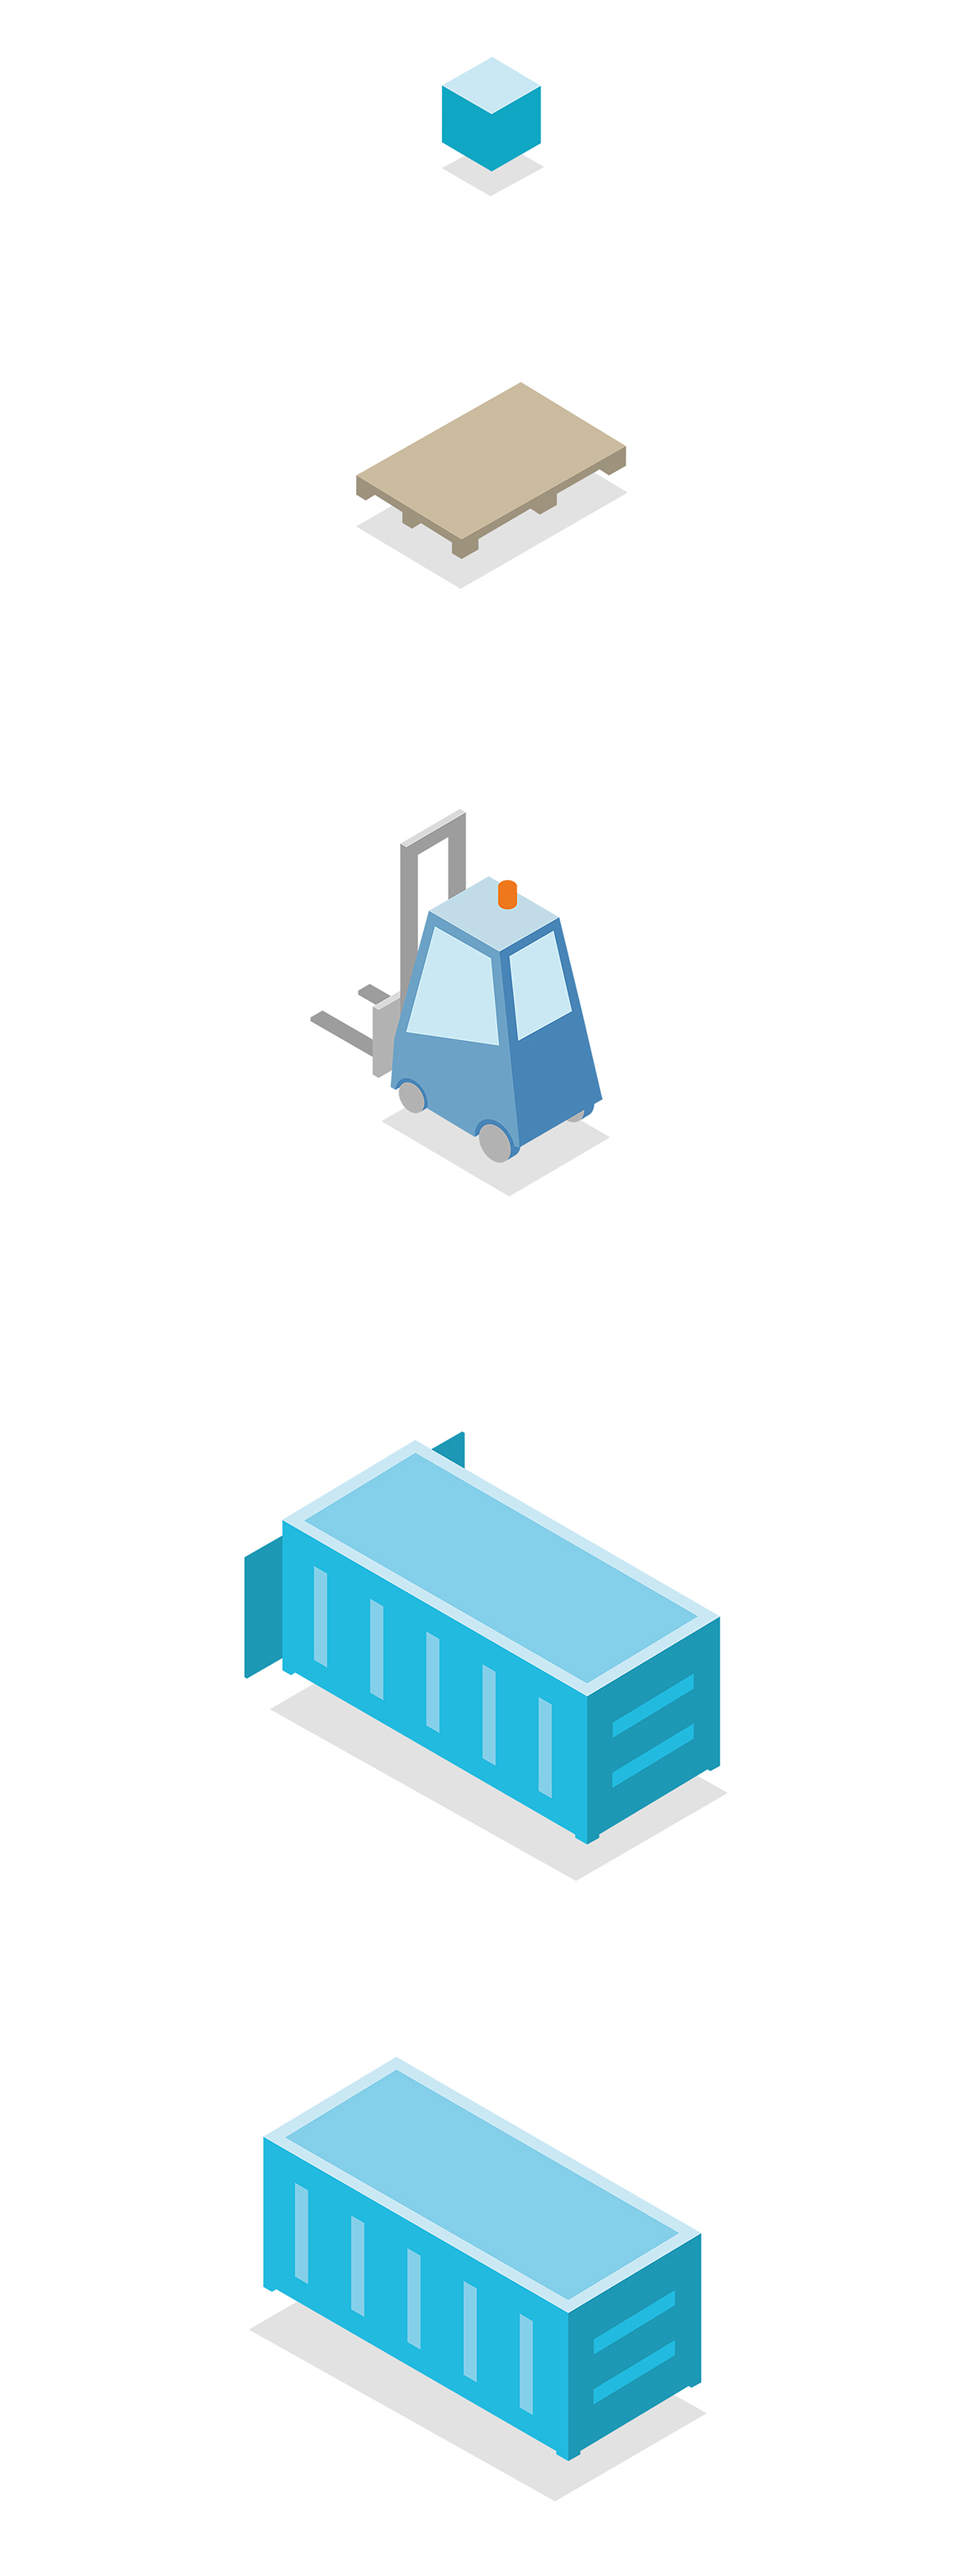 boat container apps business card application blue sea flat Web Icon Picto flat design